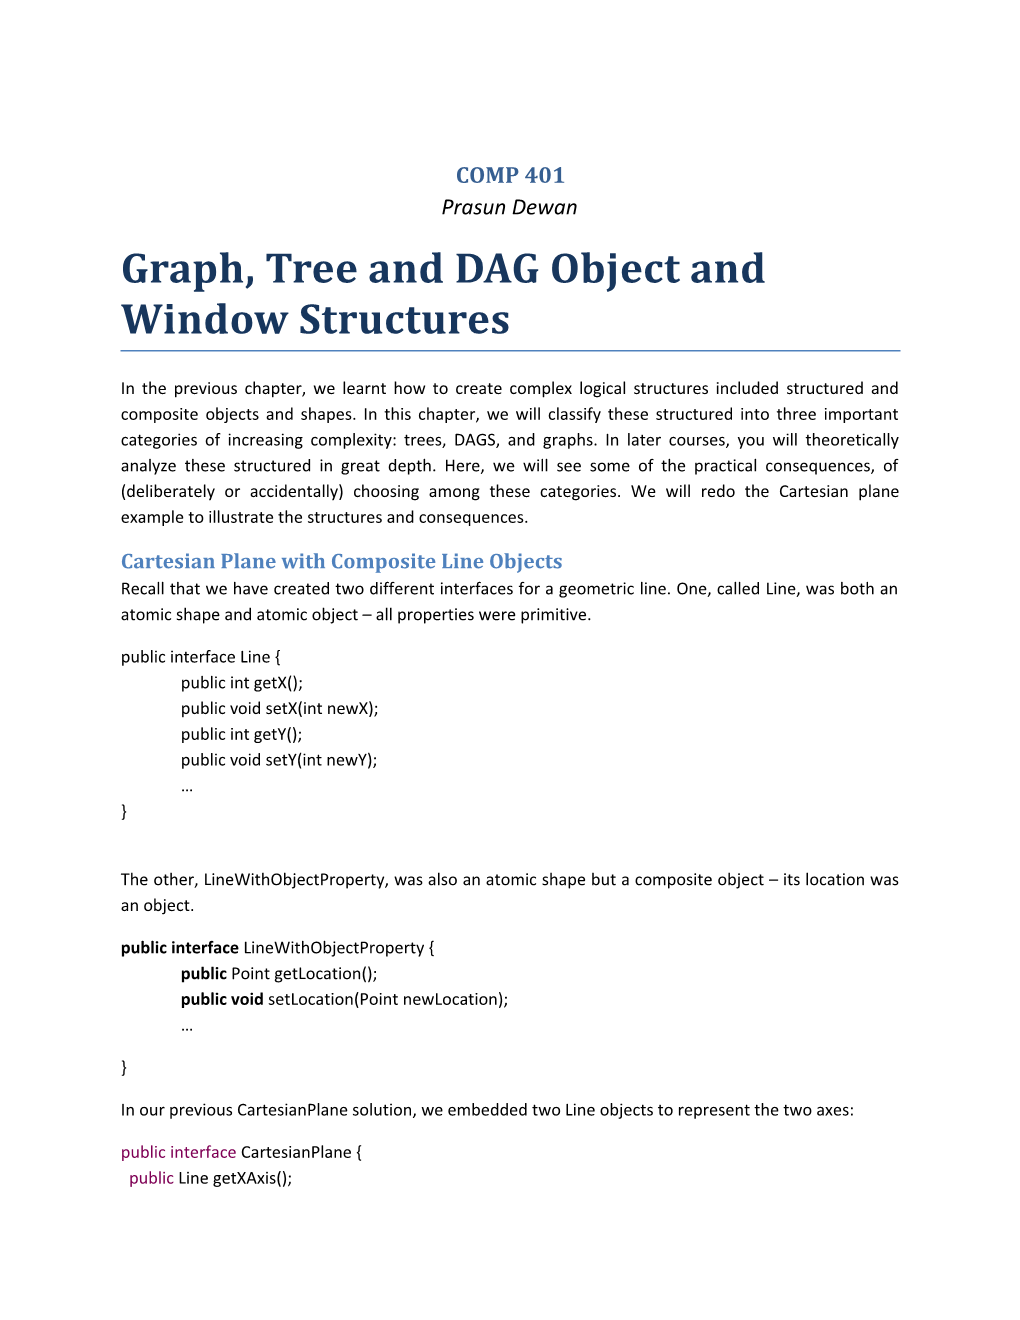 Graph, Tree and DAG Object and Window Structures